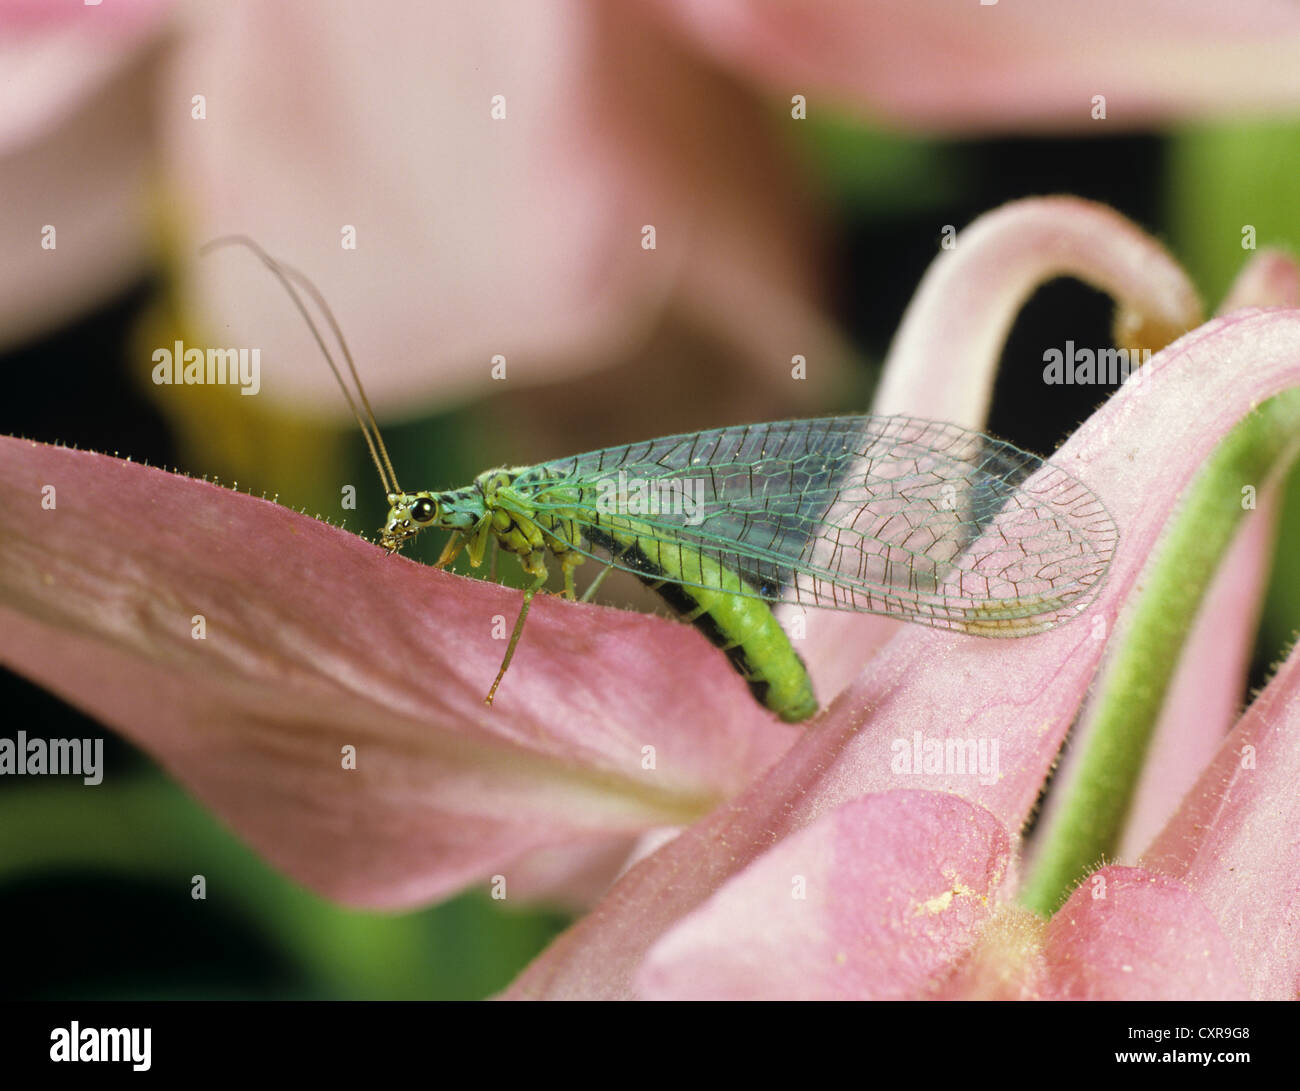 Lacewing, Chrysopa perla, adult on pink Aquilegia flower Stock Photo